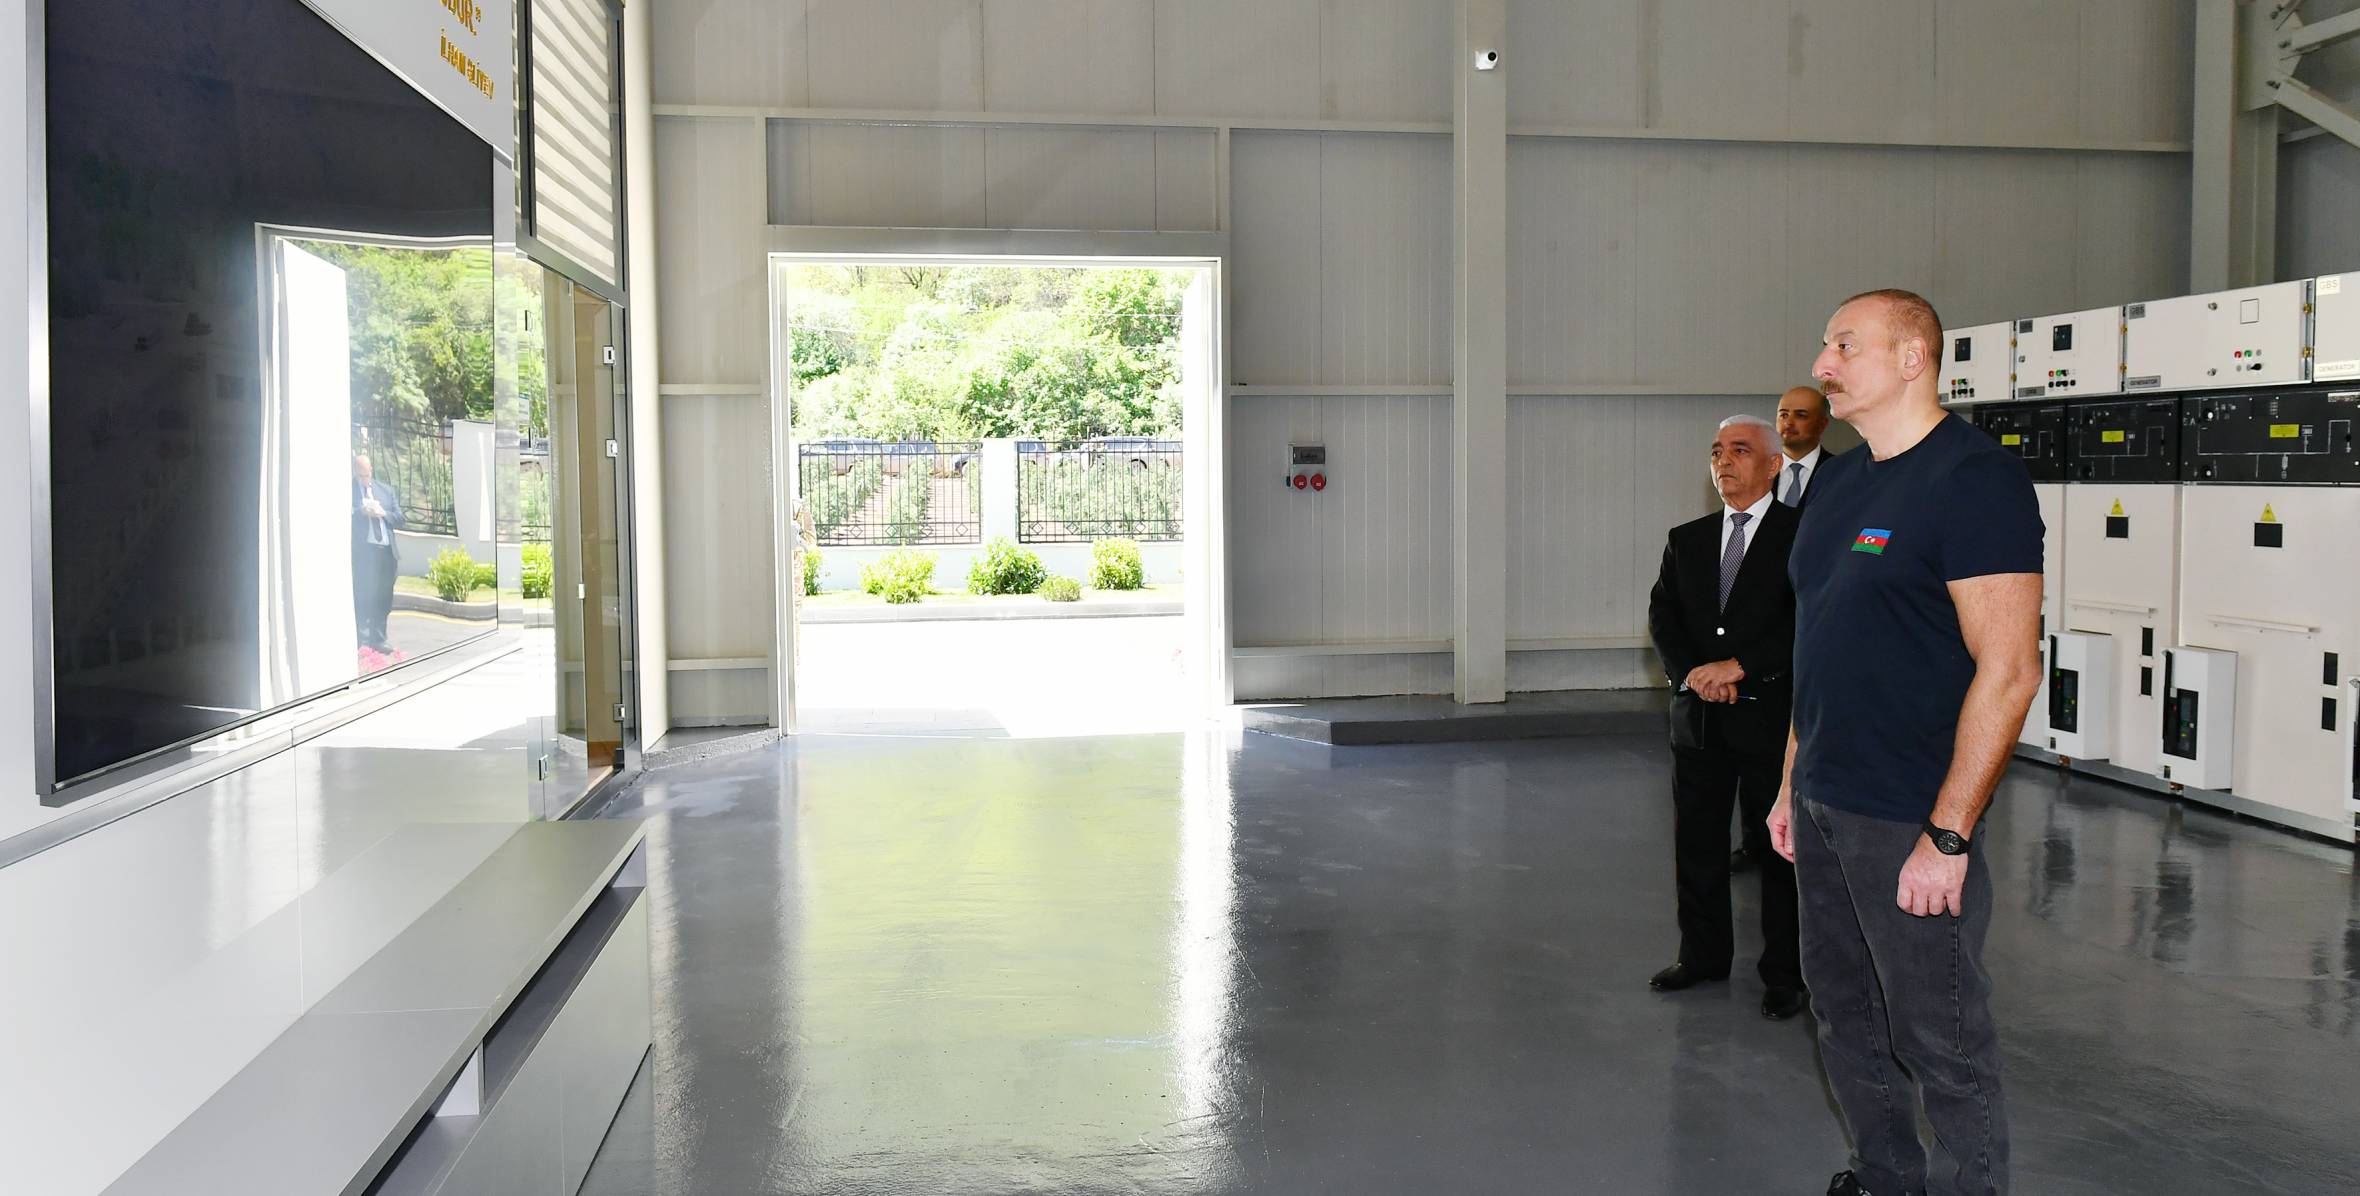 Ilham Aliyev viewed construction progress at “Sarigishlag” hydroelectric power station owned by “Azerenergy” in Zangilan